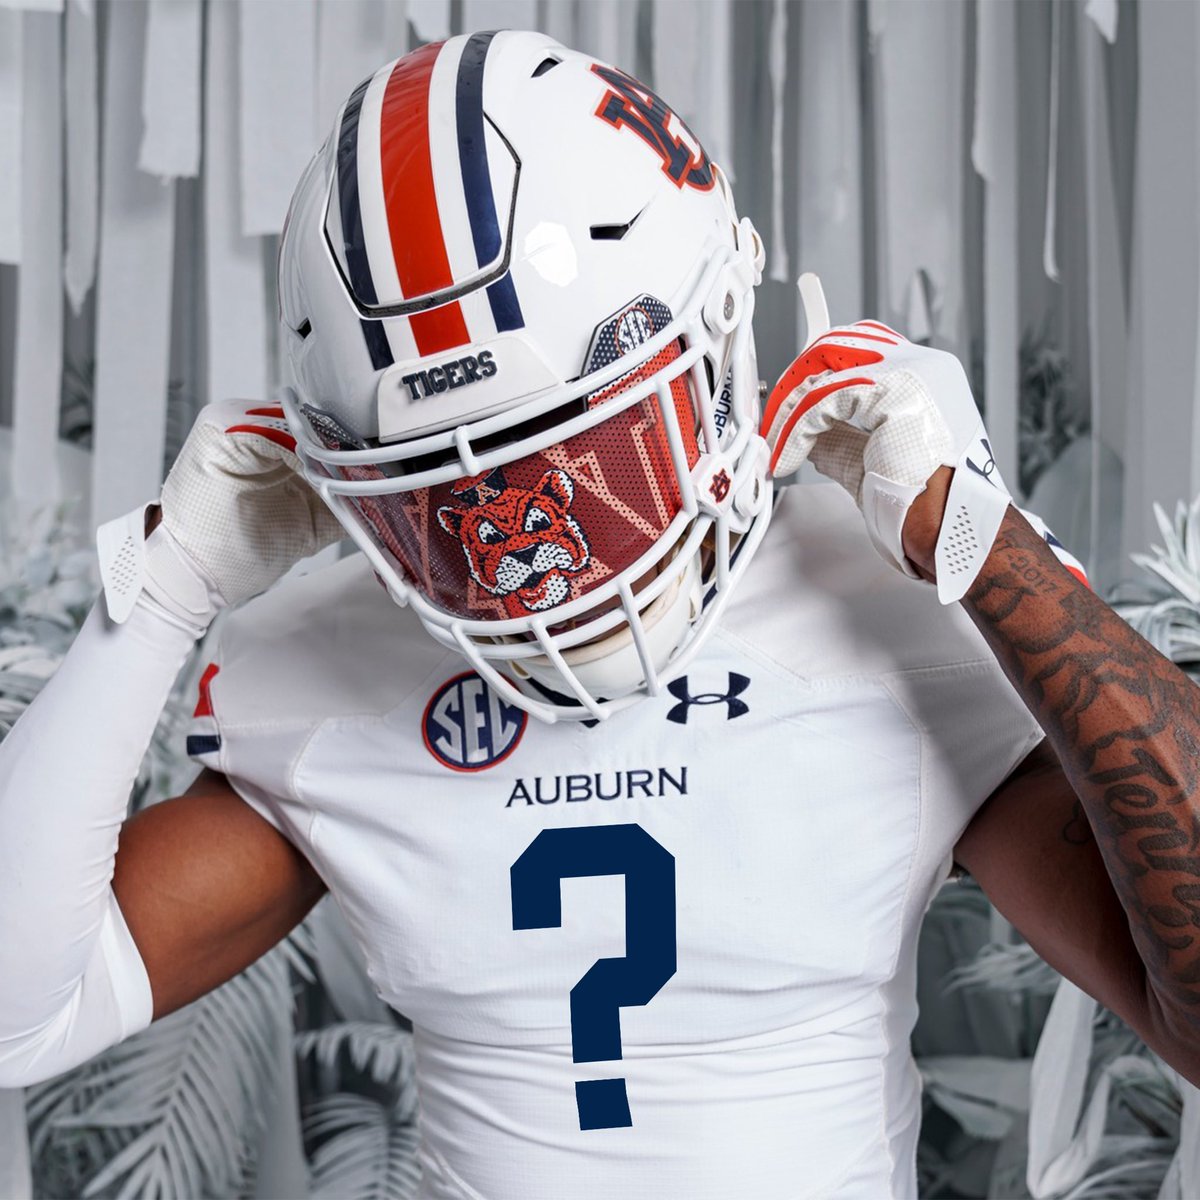 Perry Thompson is also known by his nickname “Uno,” but the #1 is currently taken on the offense by Payton Thorne. What number should Thompson grab when he arrives on The Plains? Available “Normal” WR Numbers: #3 #9 #16 #WarEagle #AuburnFootball